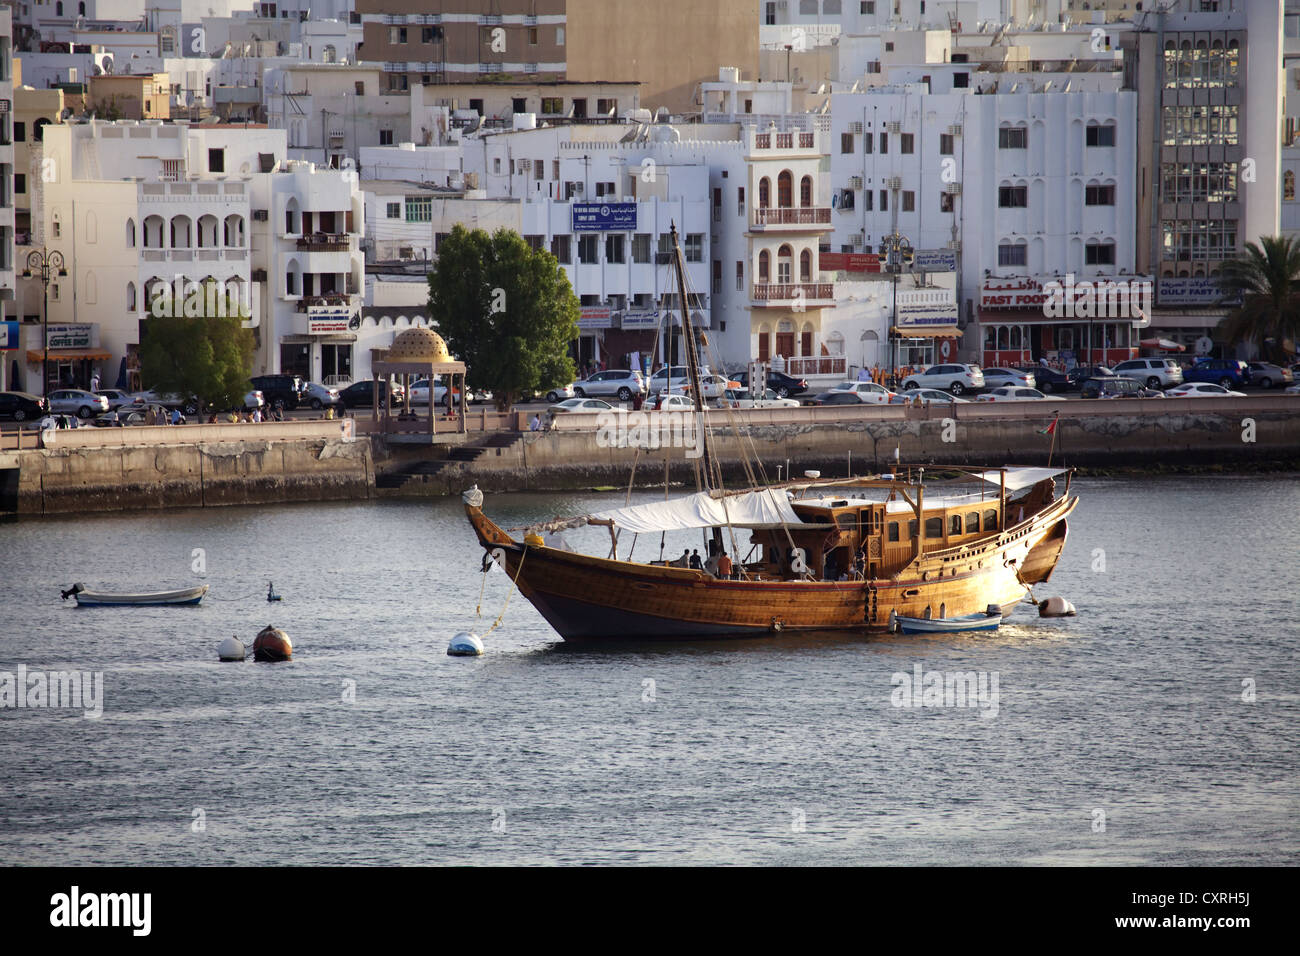 An old dhow in the harbor of Muscat, Oman, Middle East, Asia Stock Photo